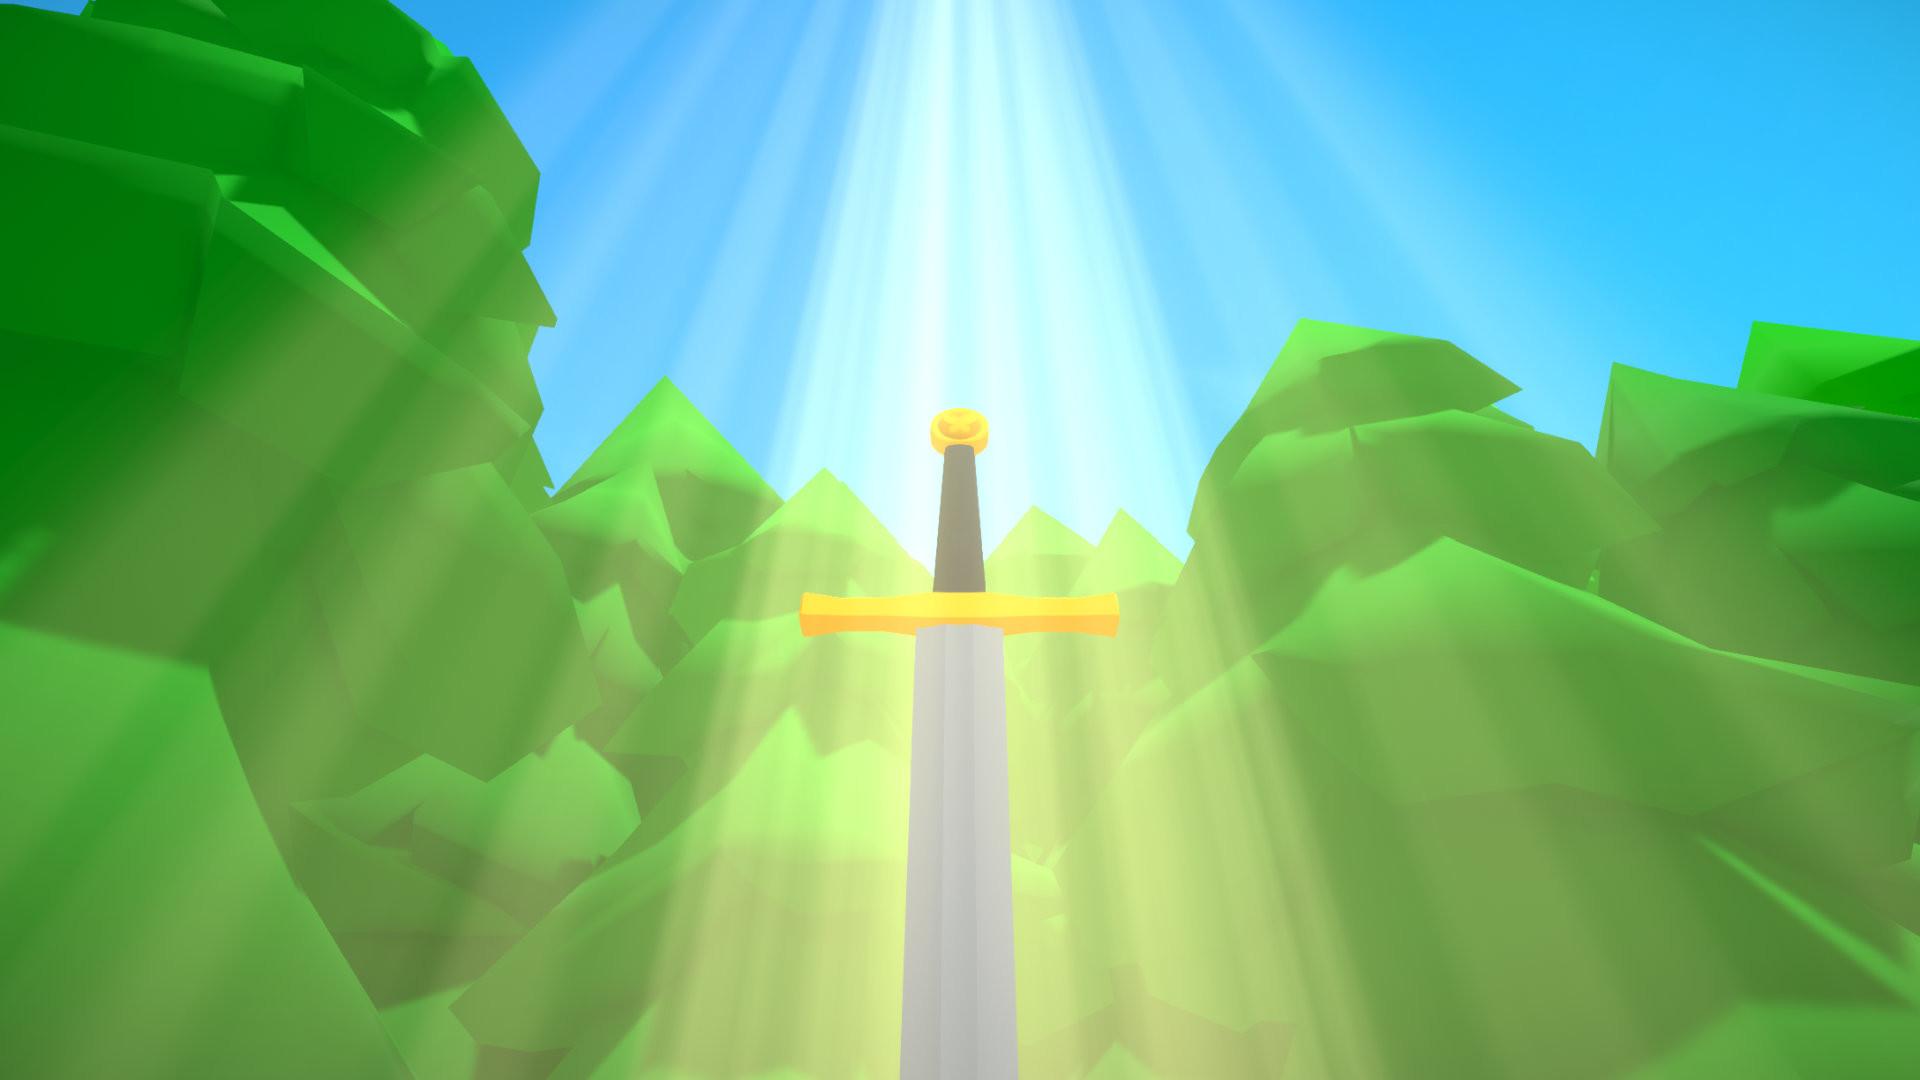 Screenshot №5 from game The one who pulls out the sword will be crowned king